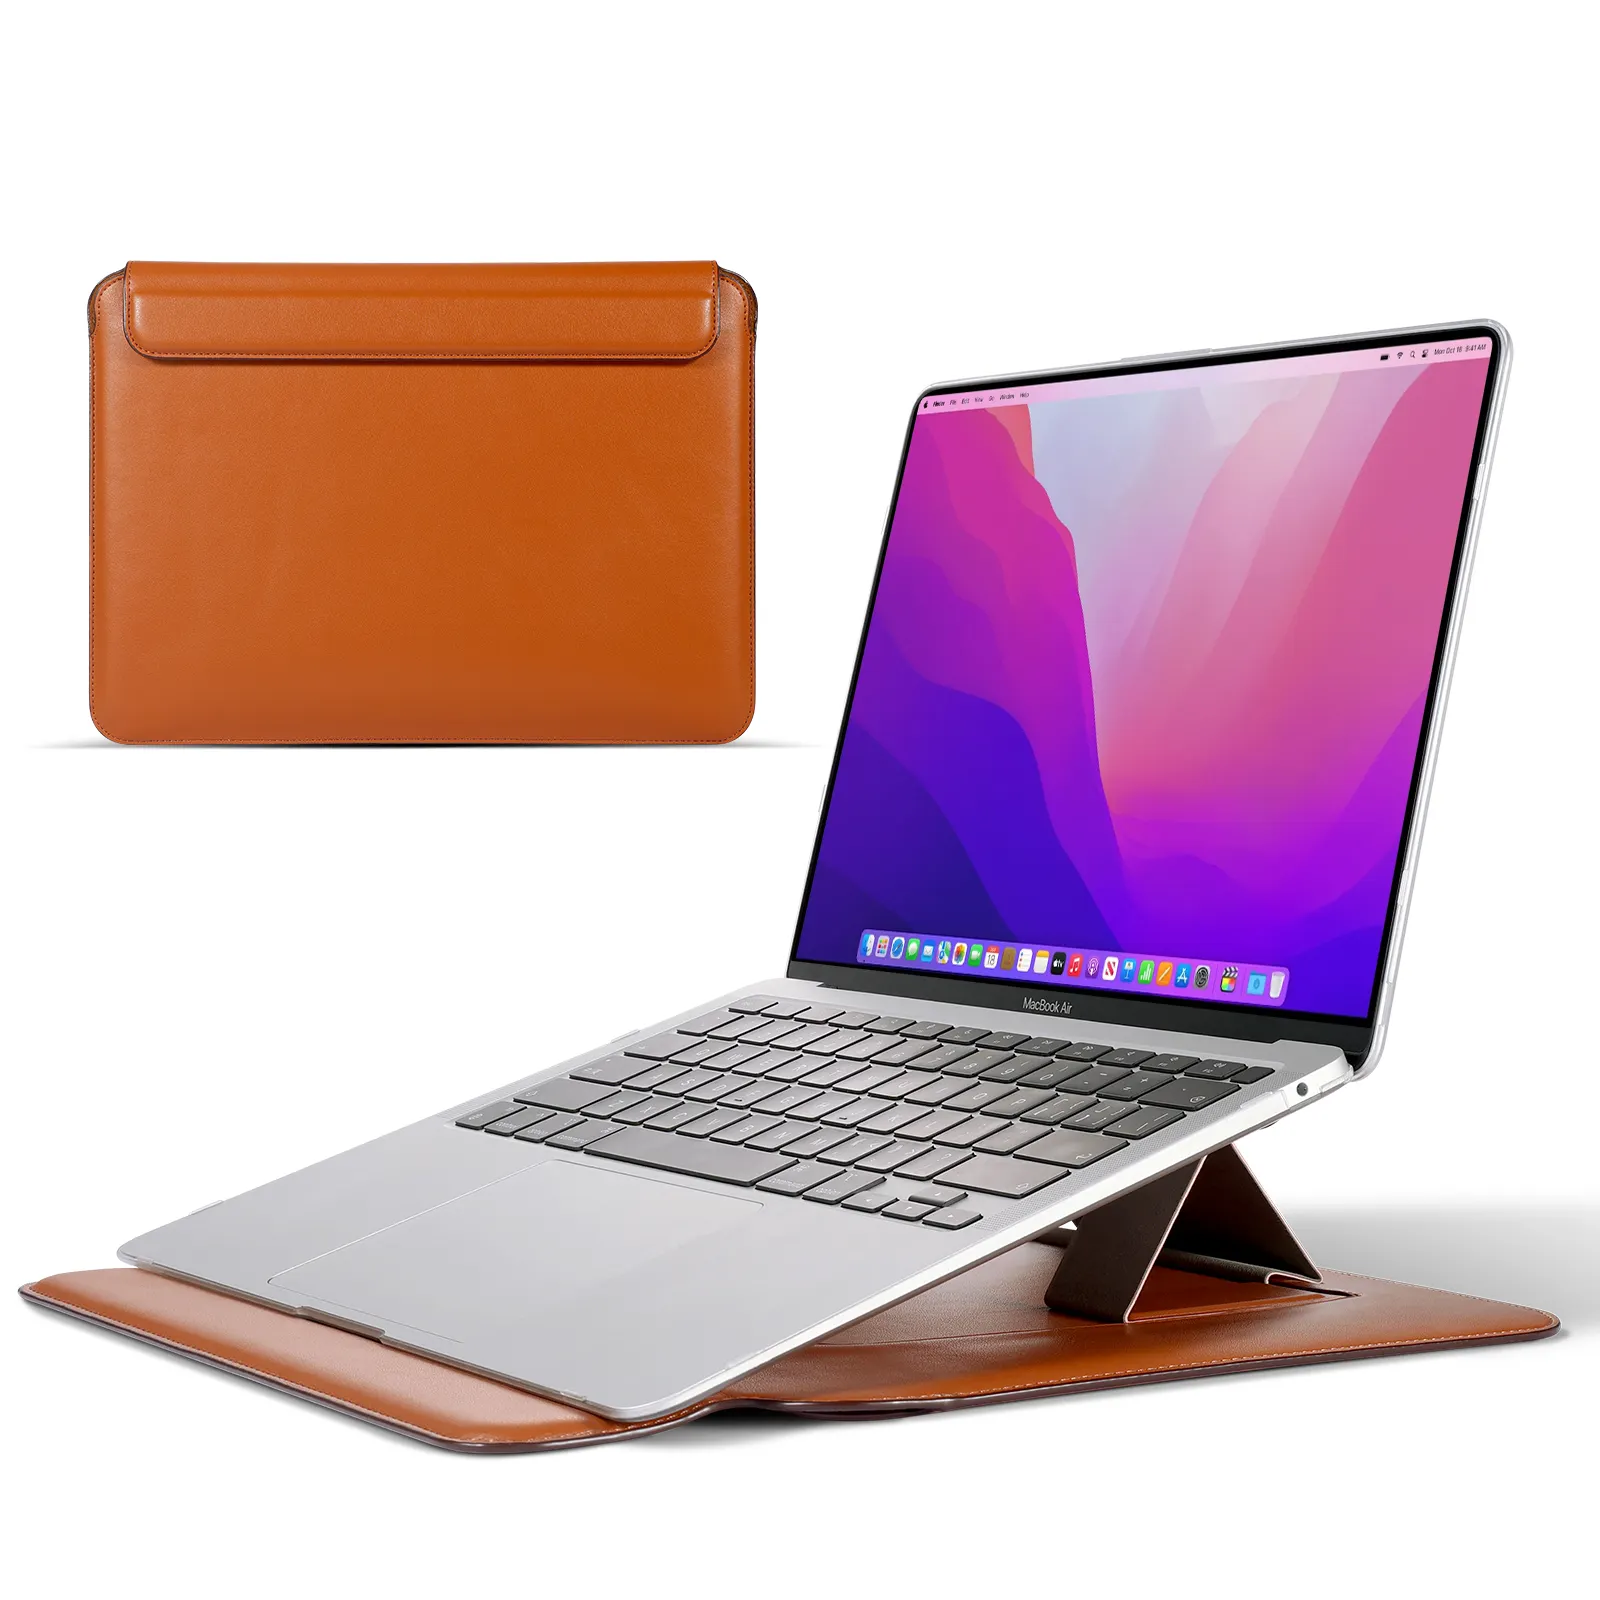 Most Popular Flexible Stand Laptop Bag Soft Sleeve For Macbook Air m2 Laptops Sleeve Bag Case With Foldable Stand macbook cover